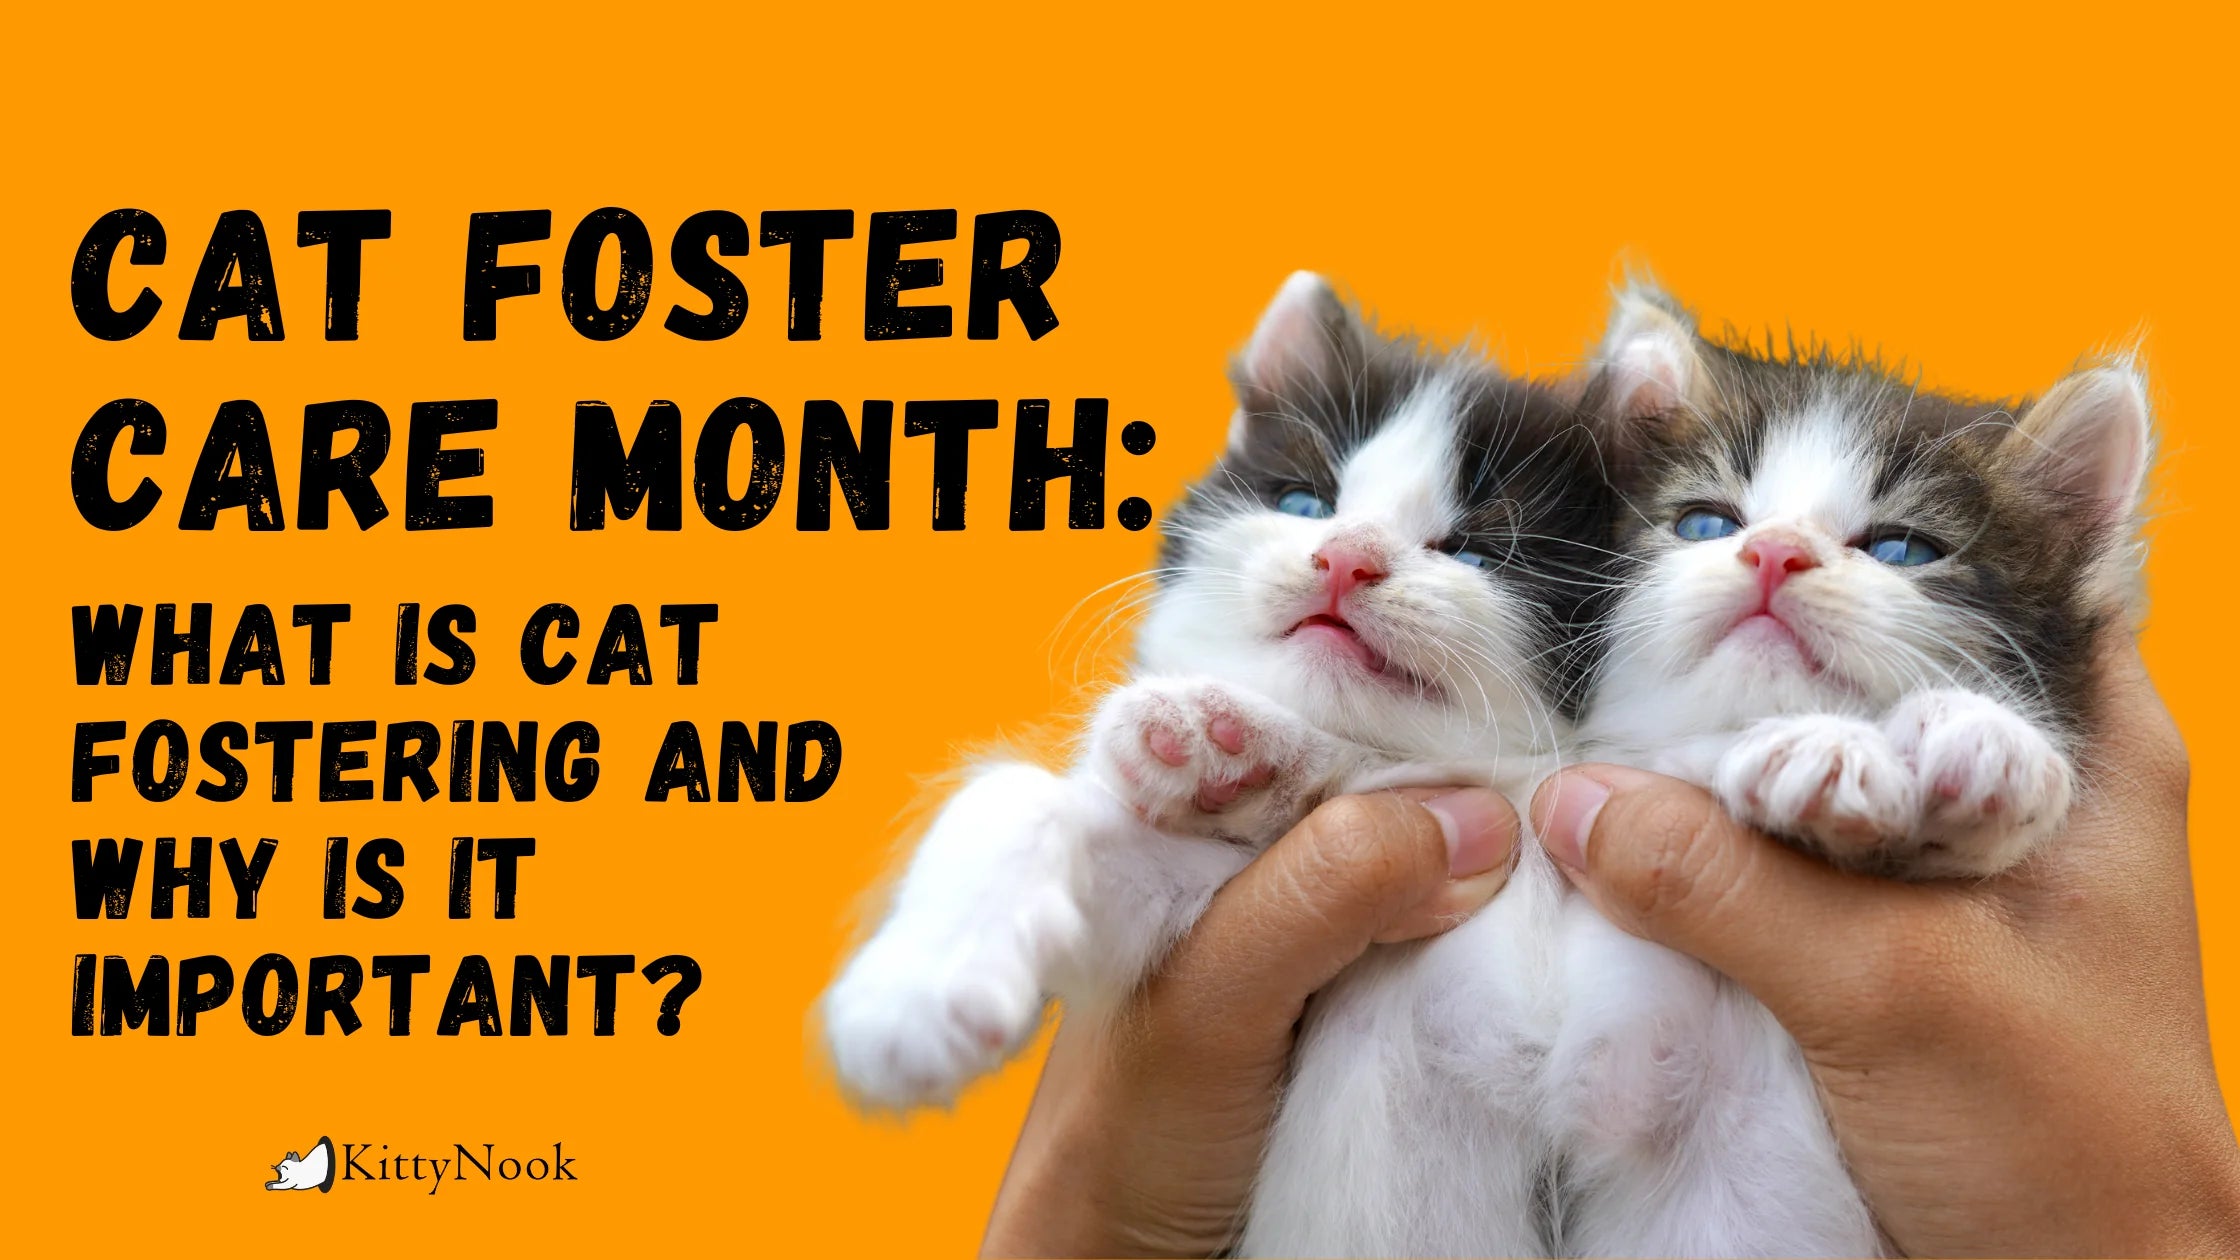 Cat Foster Care Month | What Is Cat Fostering and Why Is It Important? - KittyNook Cat Company